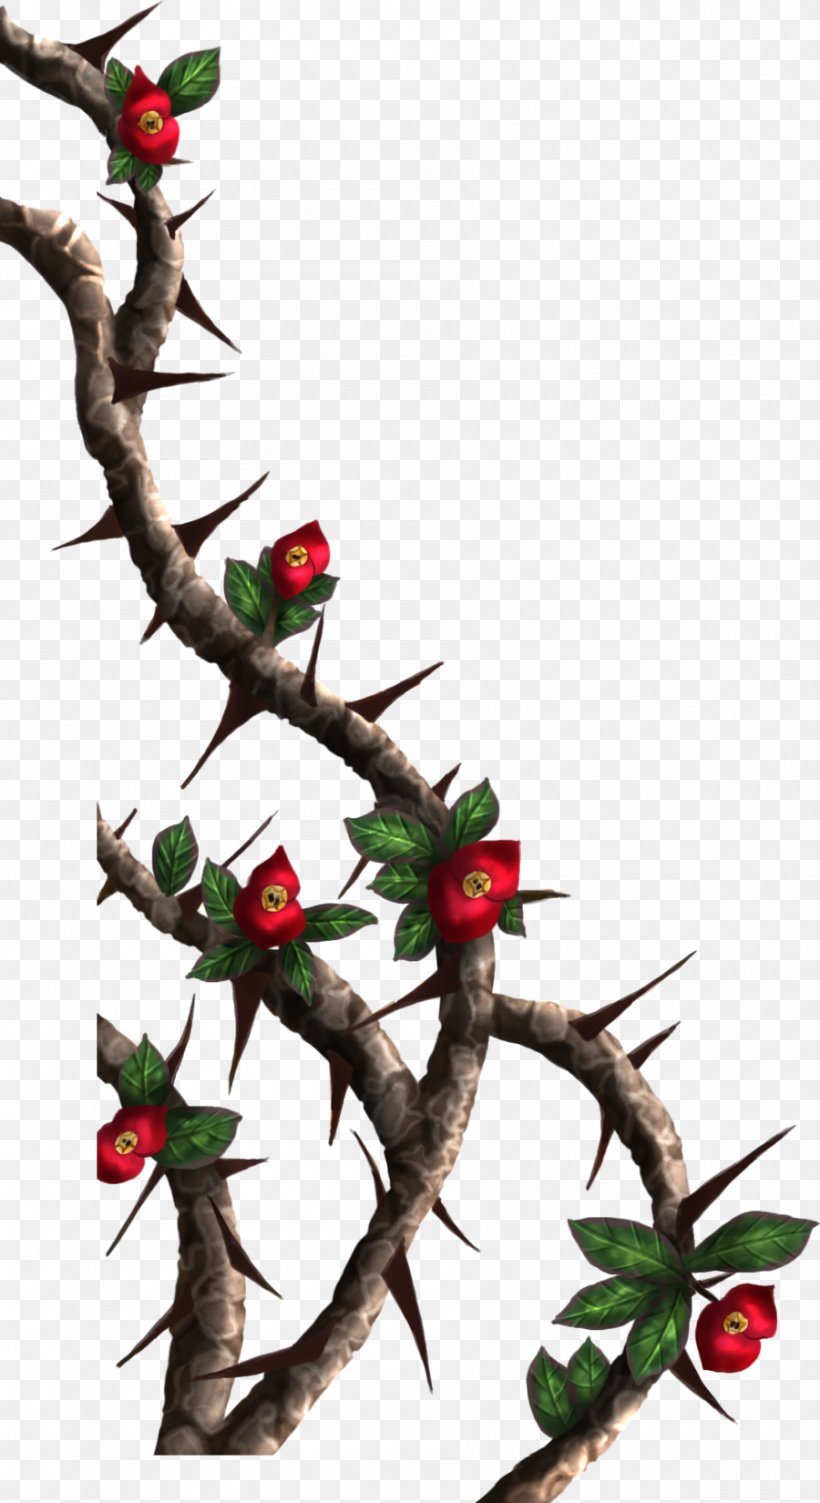 Thorns, Spines, And Prickles Rose Crown Of Thorns Drawing Clip Art, PNG